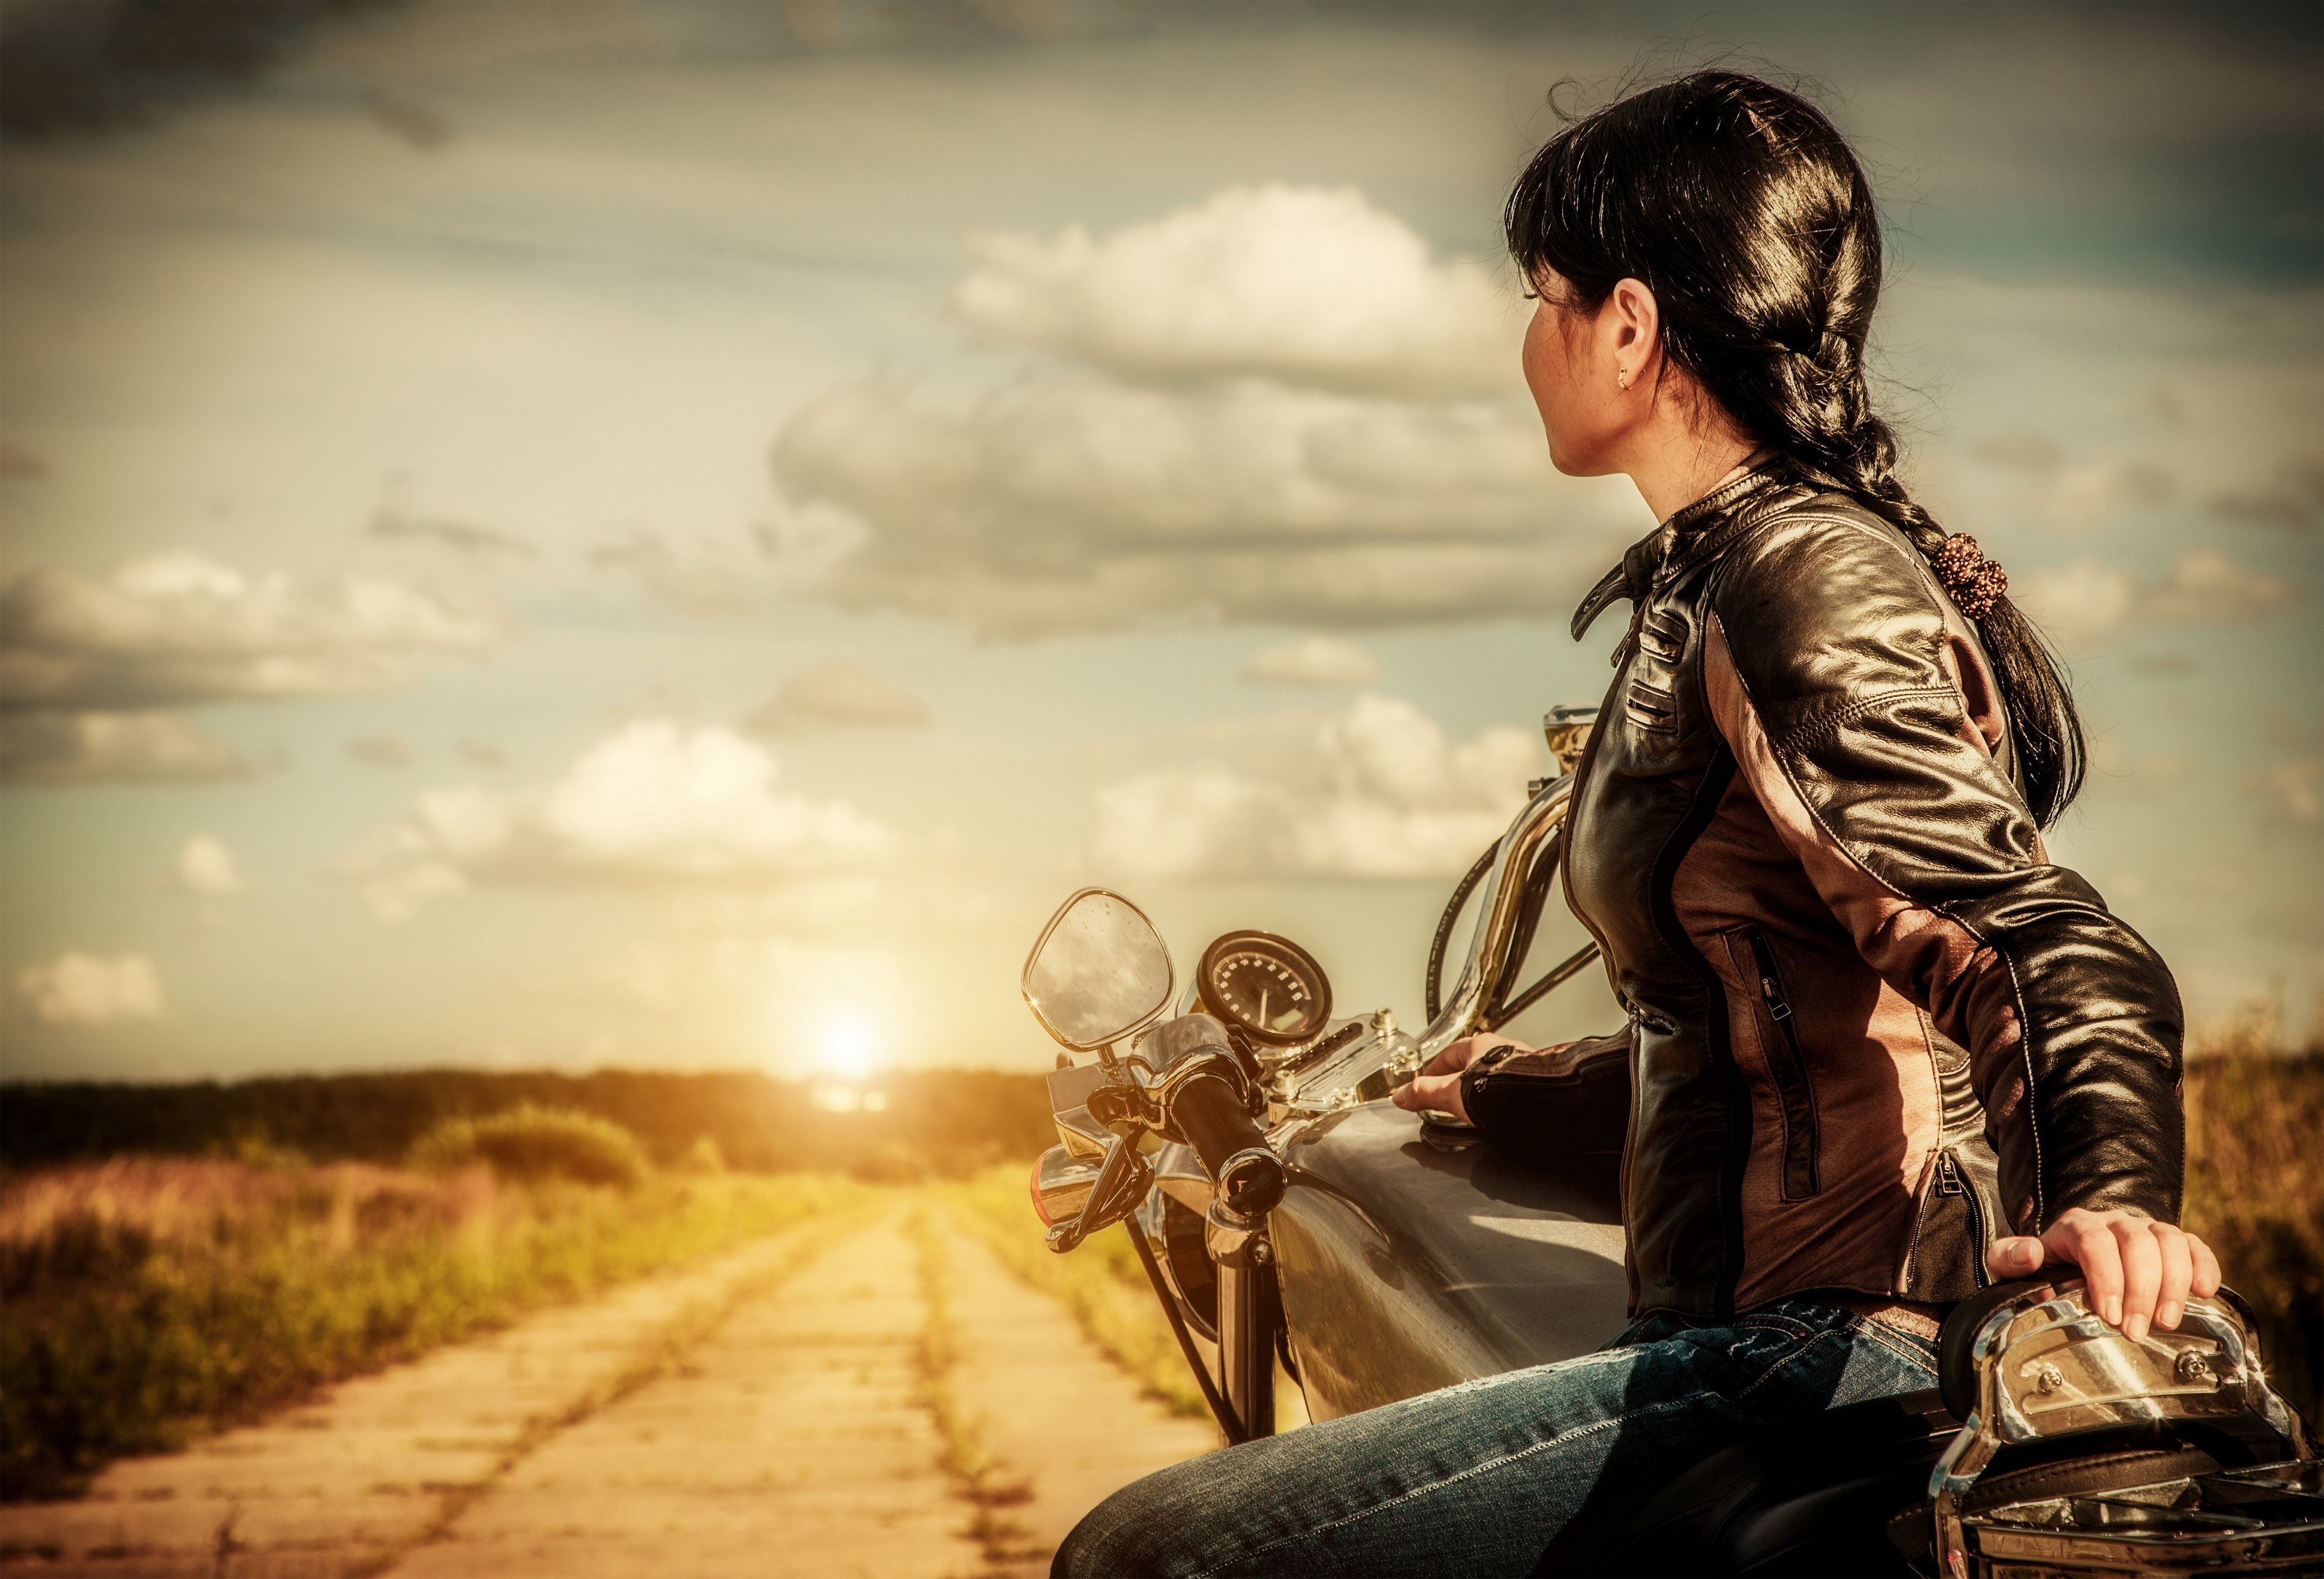 Download wallpaper the bike, motorcycle, road, the leather jacket, jacket, field, brunette, nature, girl, the sun for desktop with resolution 4000x2717. High Quality HD picture wallpaper